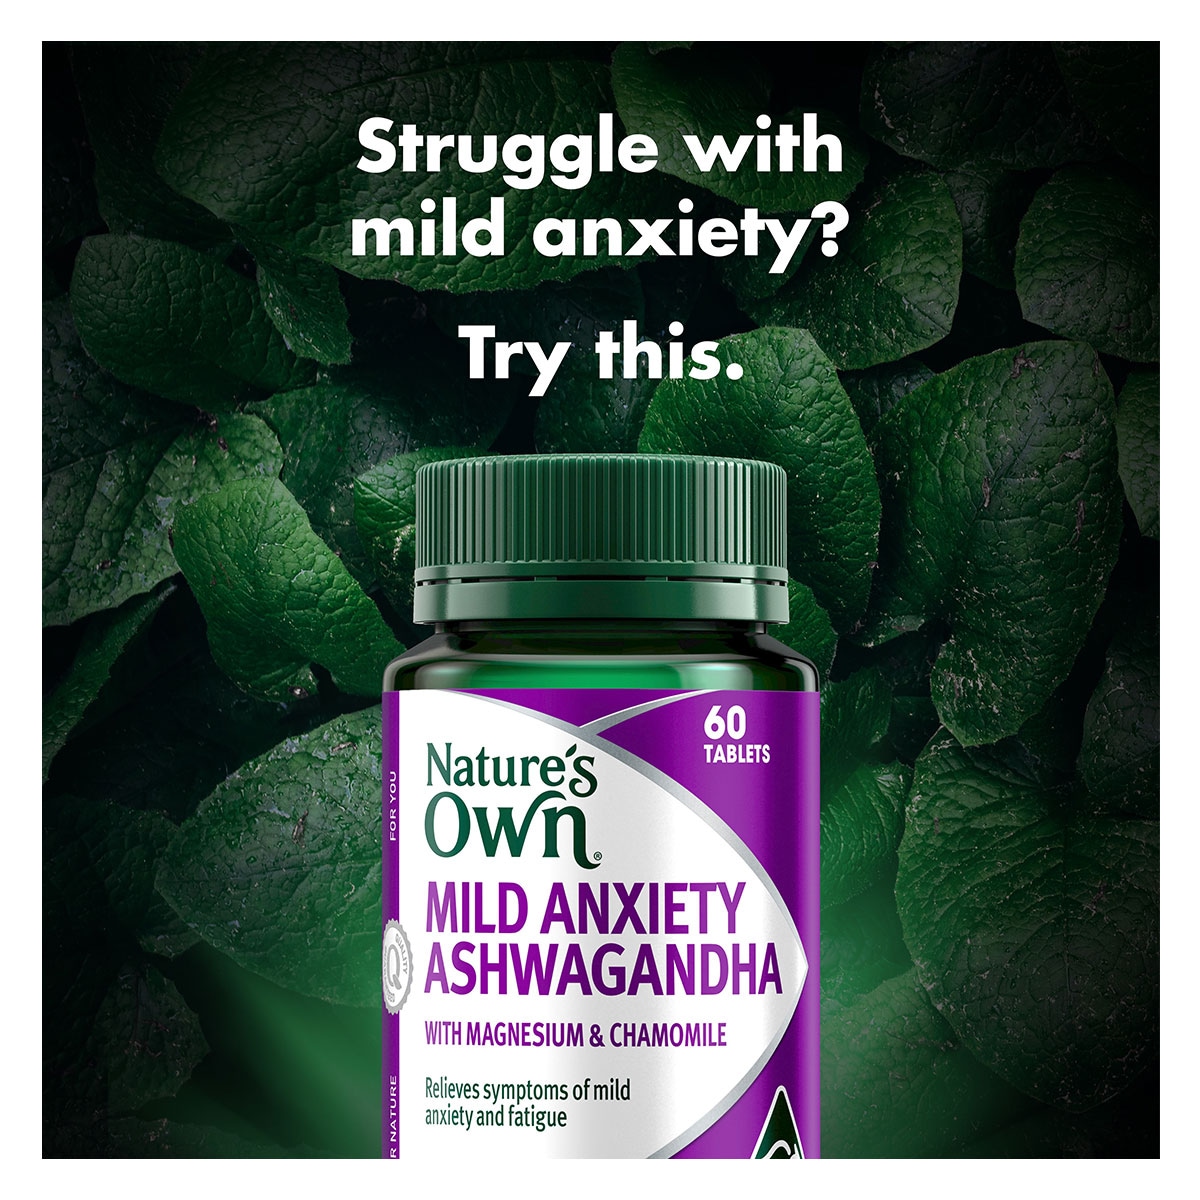 Nature's Own Mild Anxiety Ashwagandha 60 Tablets